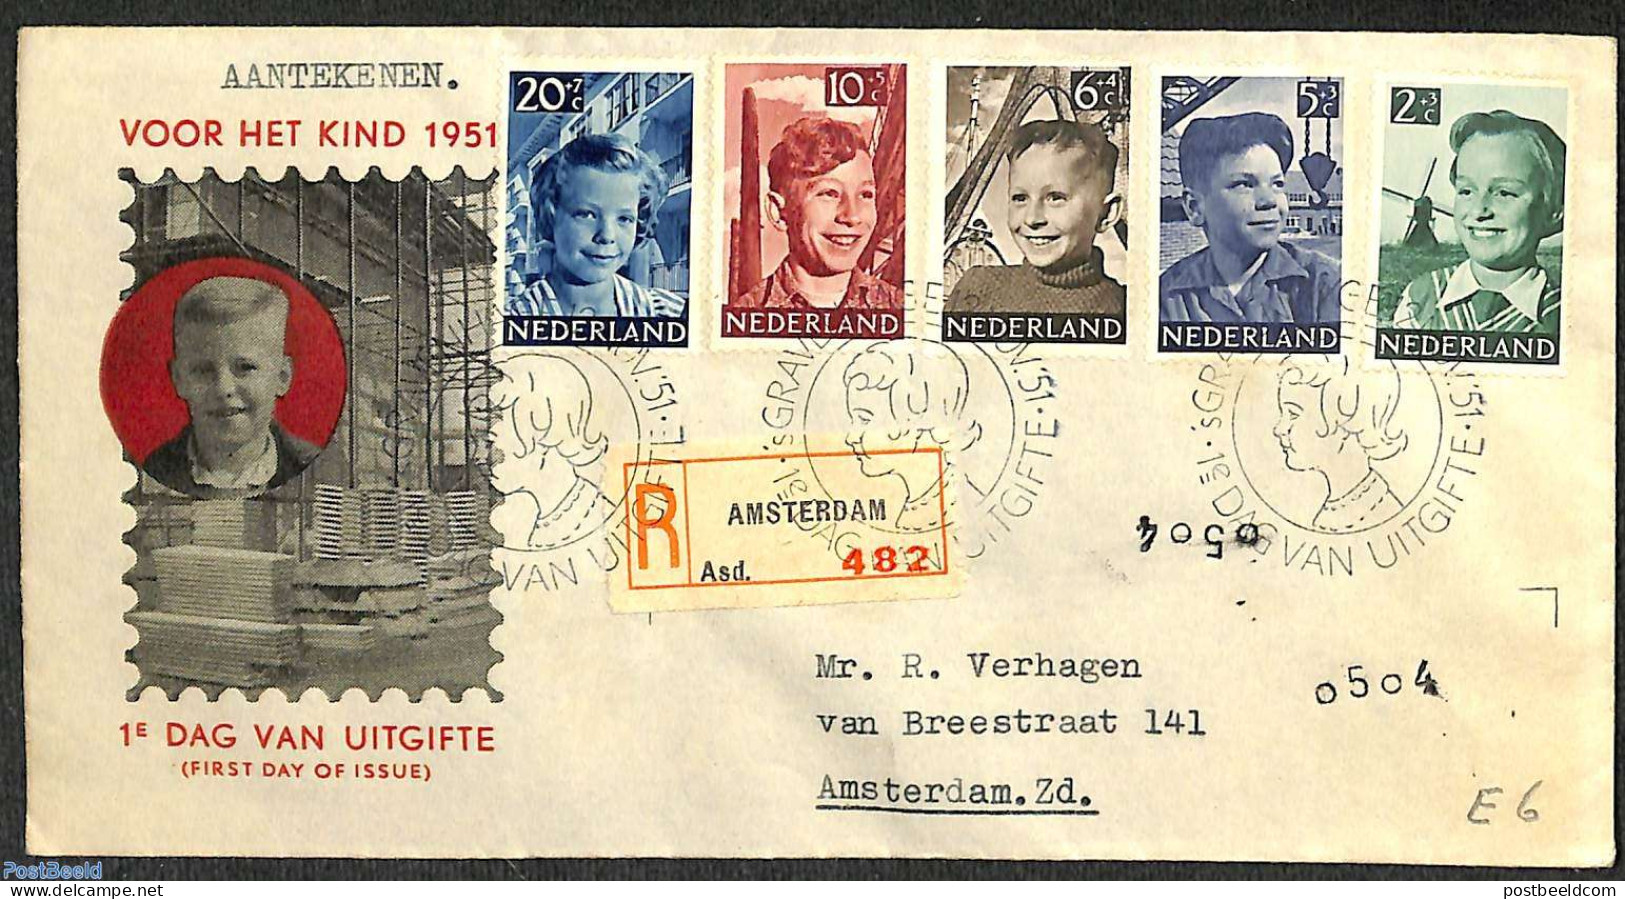 Netherlands 1951 Child Welfare 5v, FDC, Closed Flap, Typed Address, Registered, First Day Cover - Covers & Documents